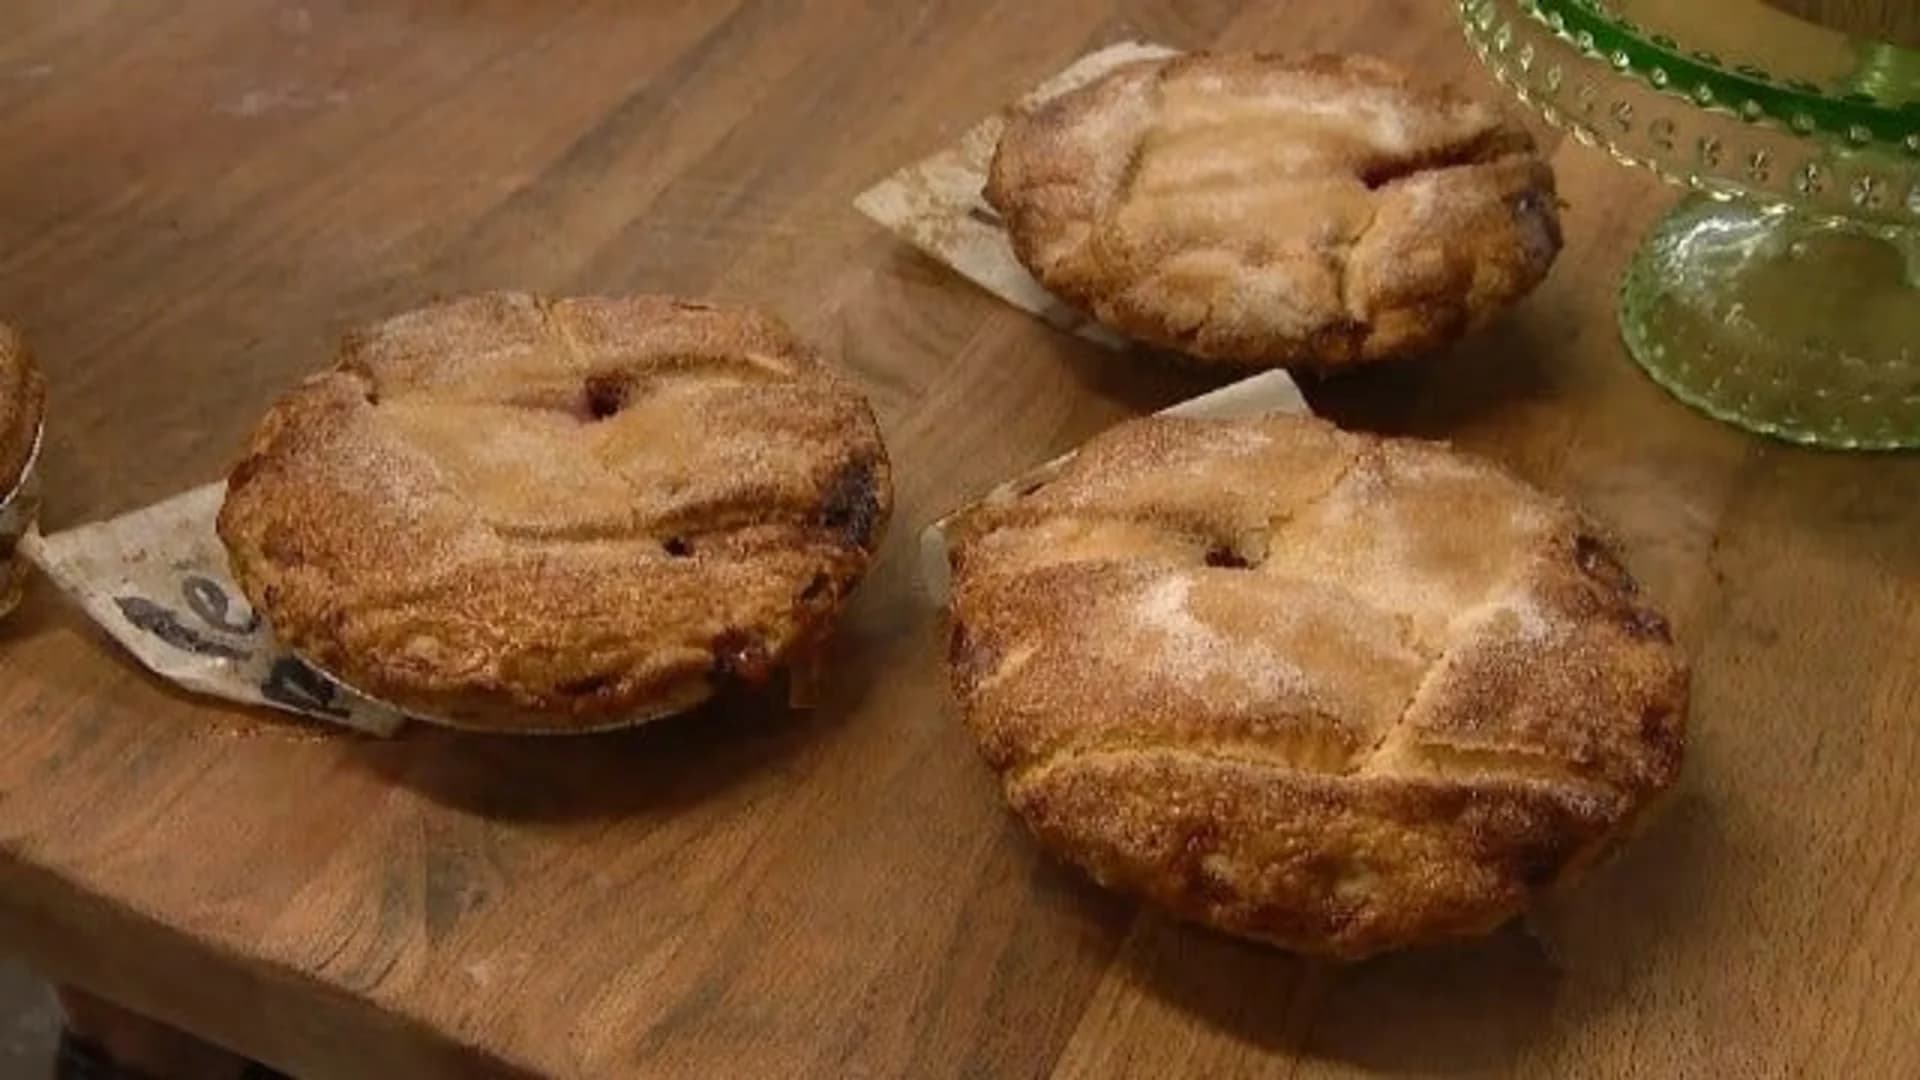 Tasty Tuesday: Pies